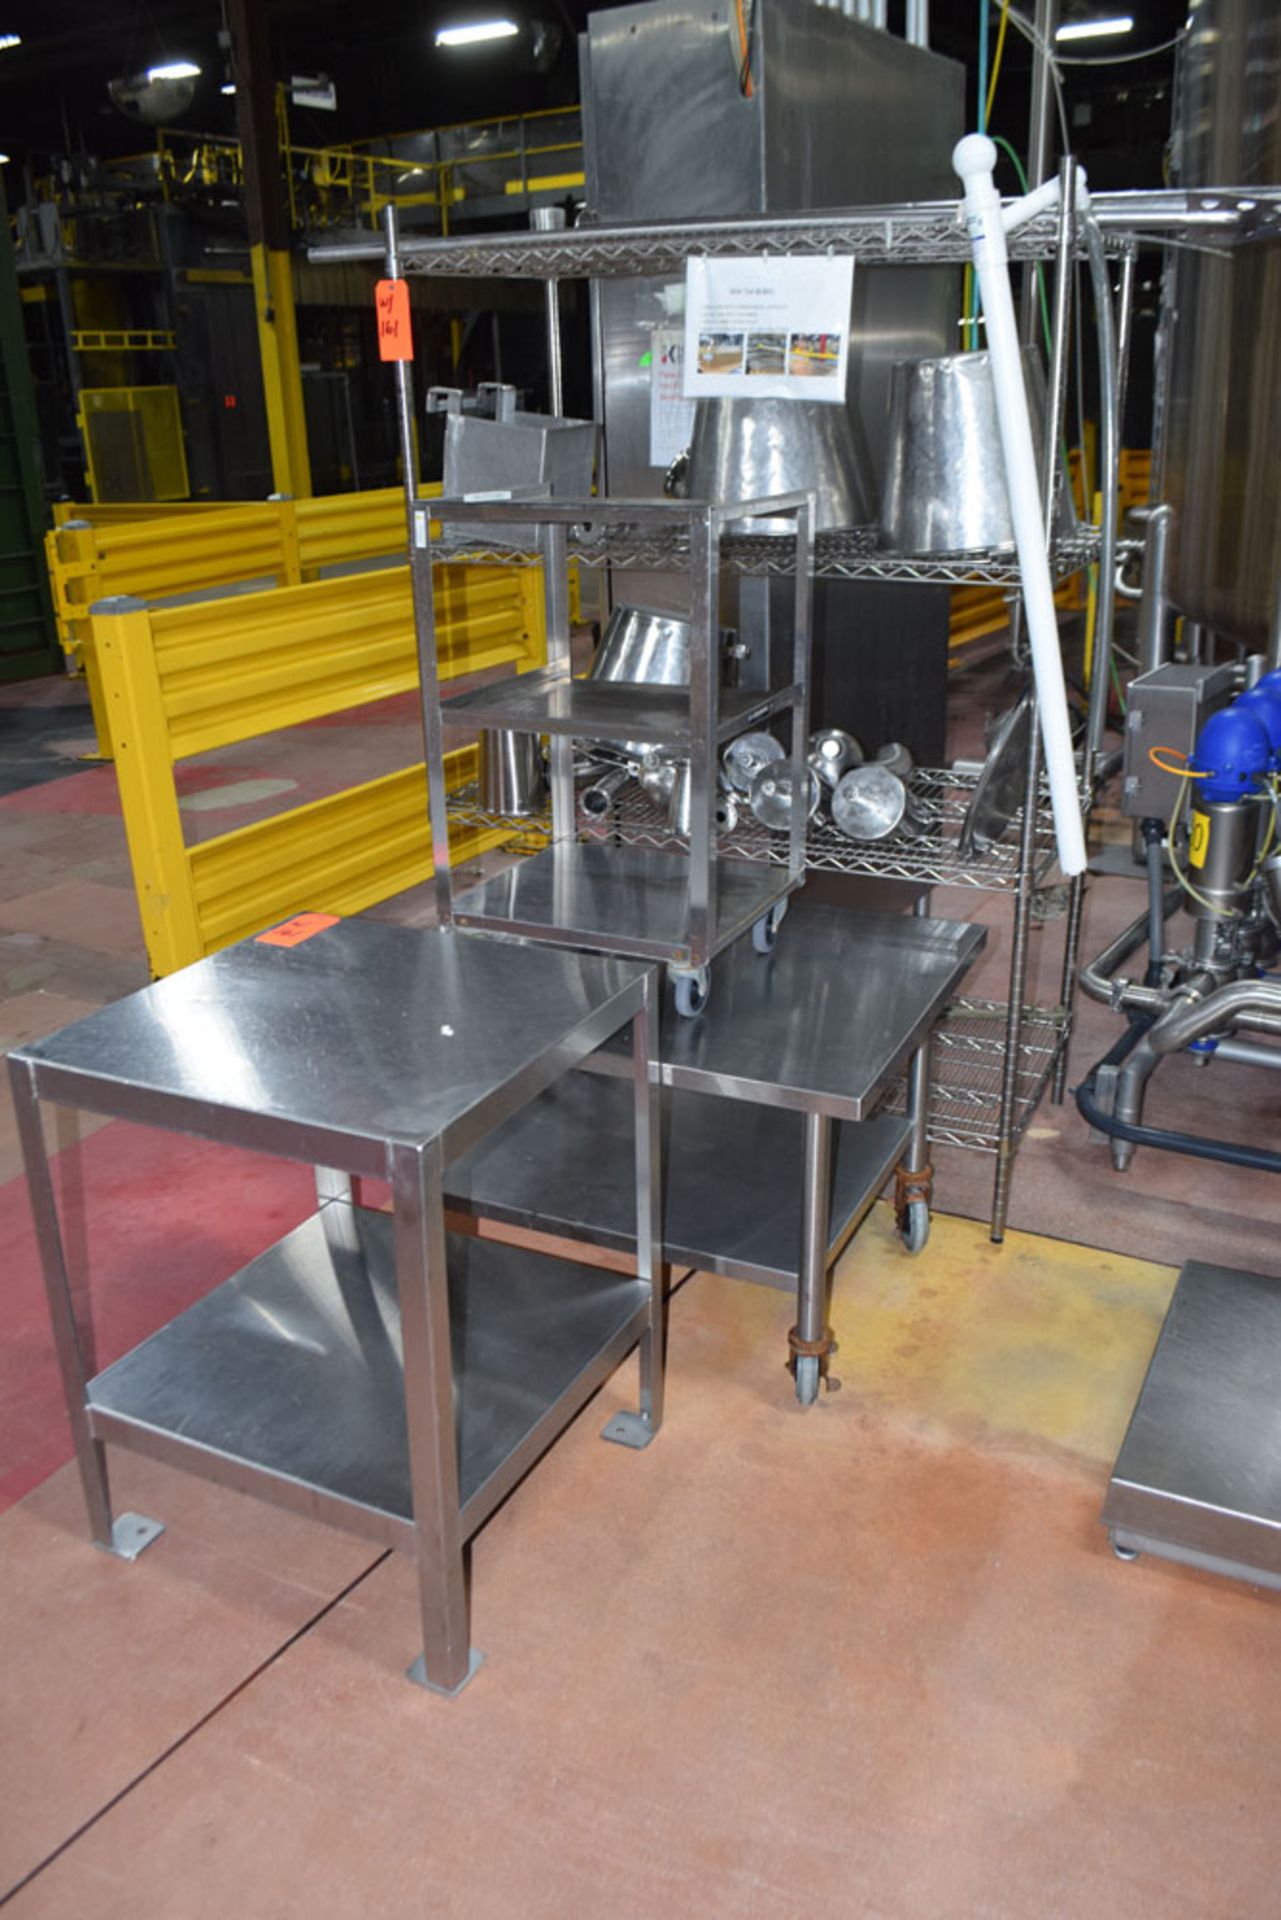 Lot (1) Stainless Steel Platform, (3) Stainless Steel Tables, Wire Rack with Miscellaneous - Image 3 of 5